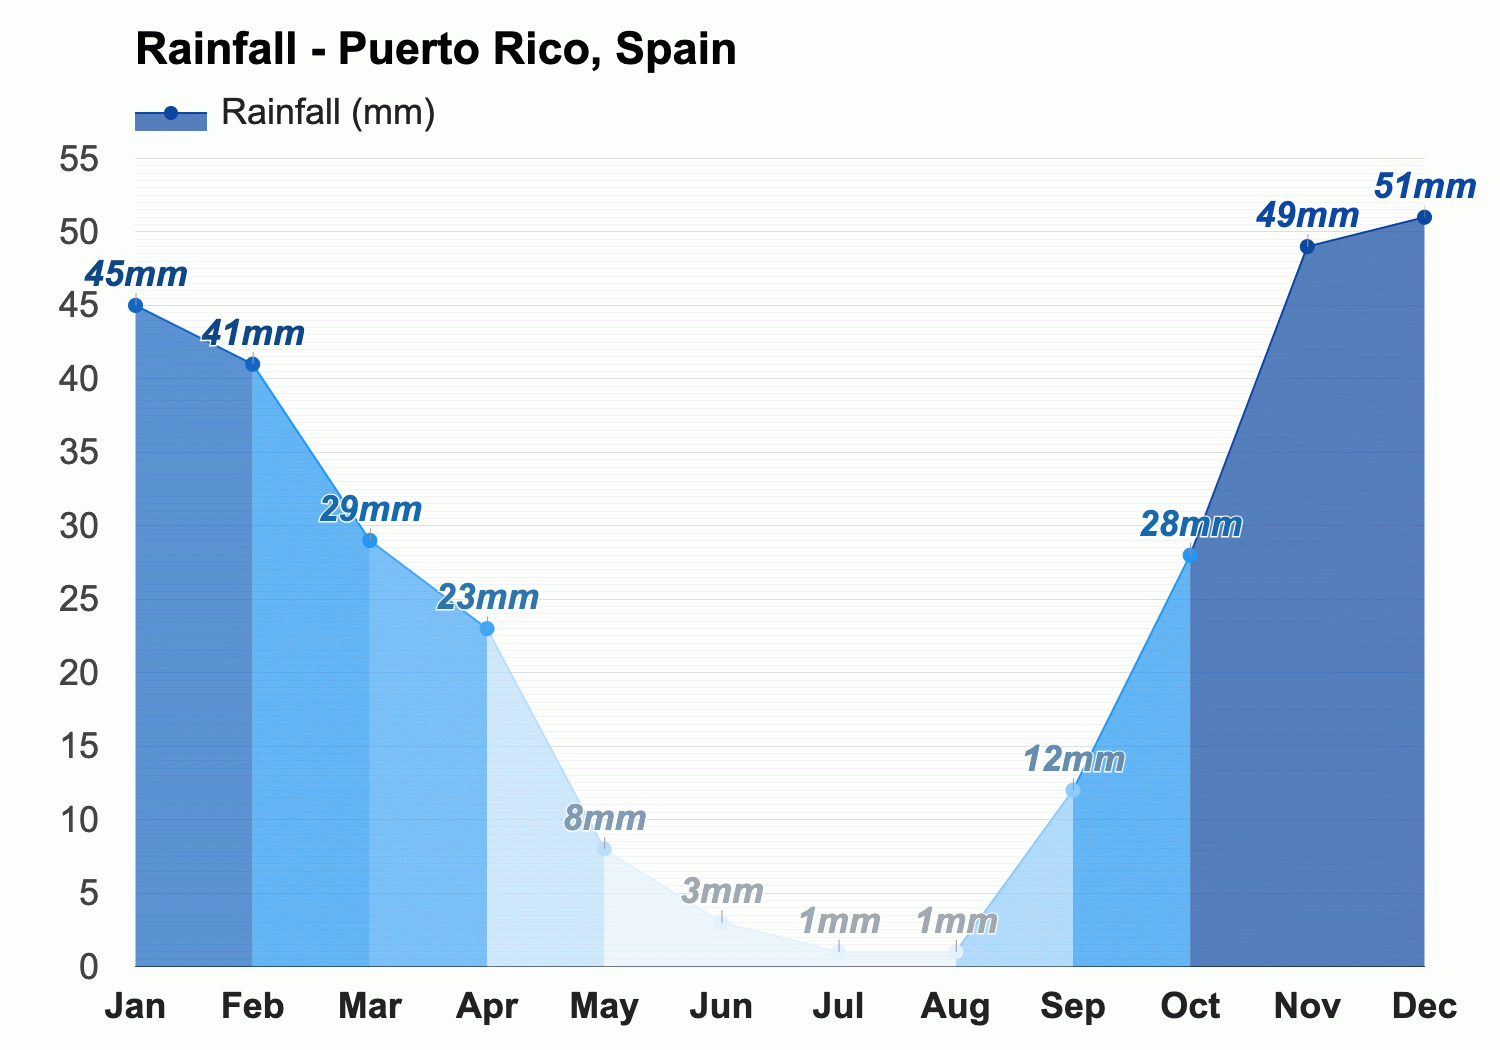 May Weather forecast - Spring forecast - Puerto Rico, Spain